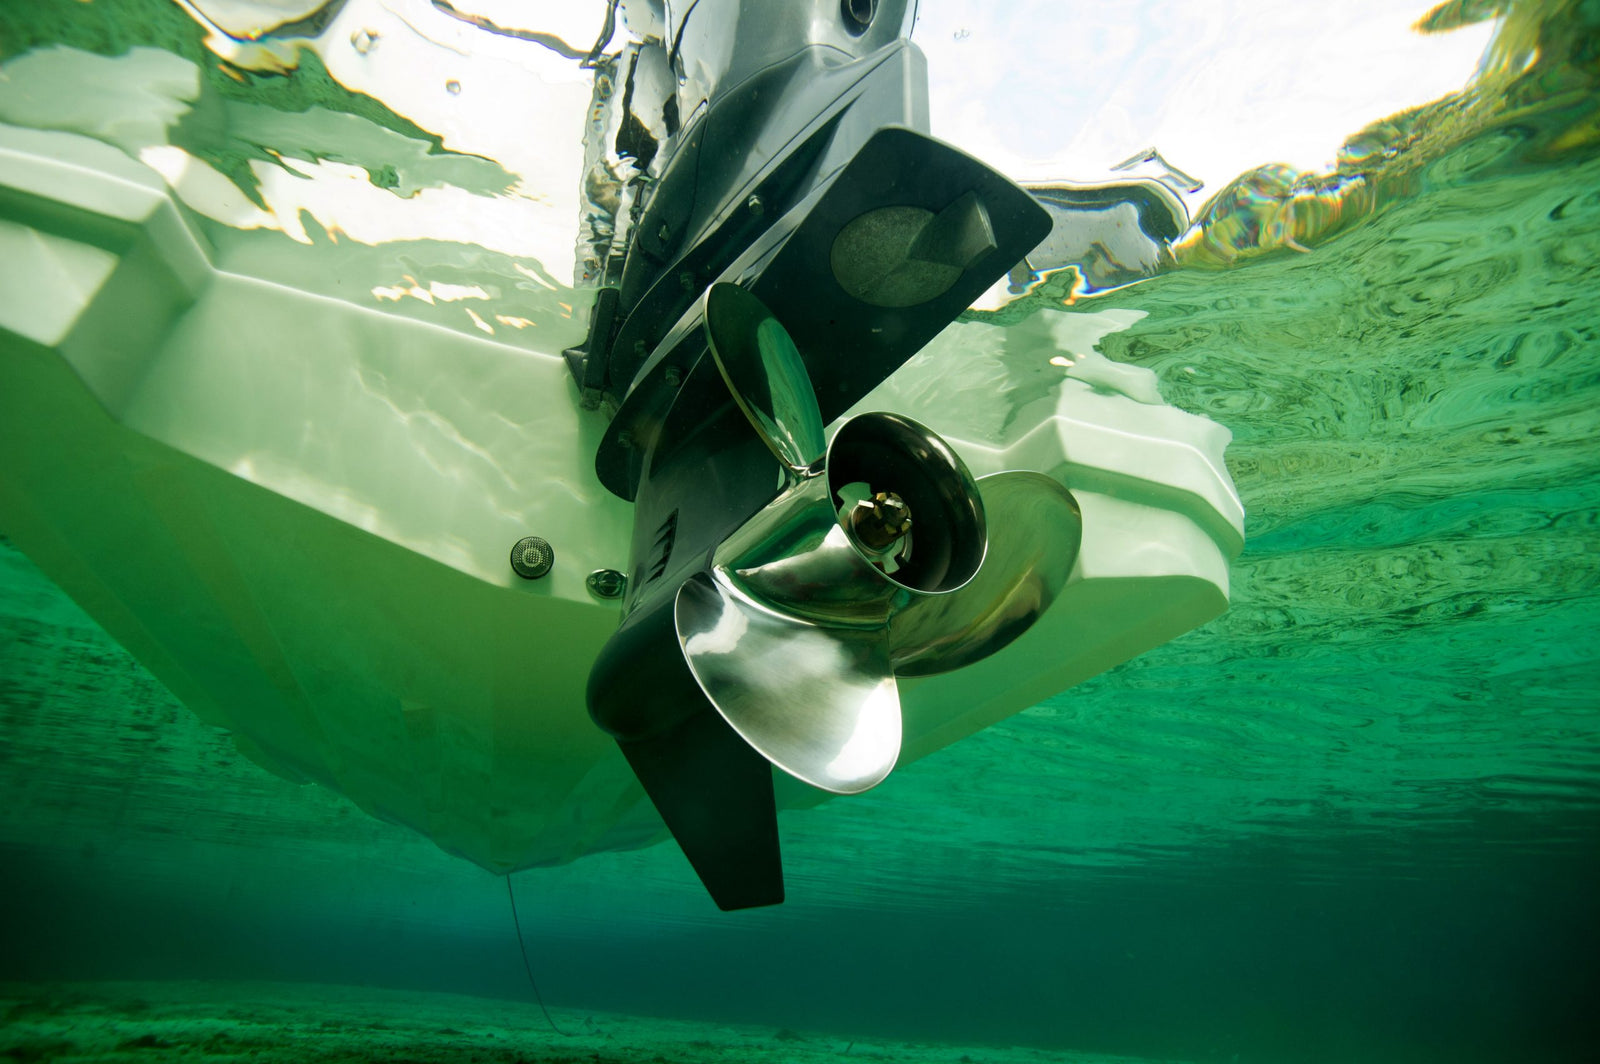 Selecting the Yamaha Propeller That’s Best for You